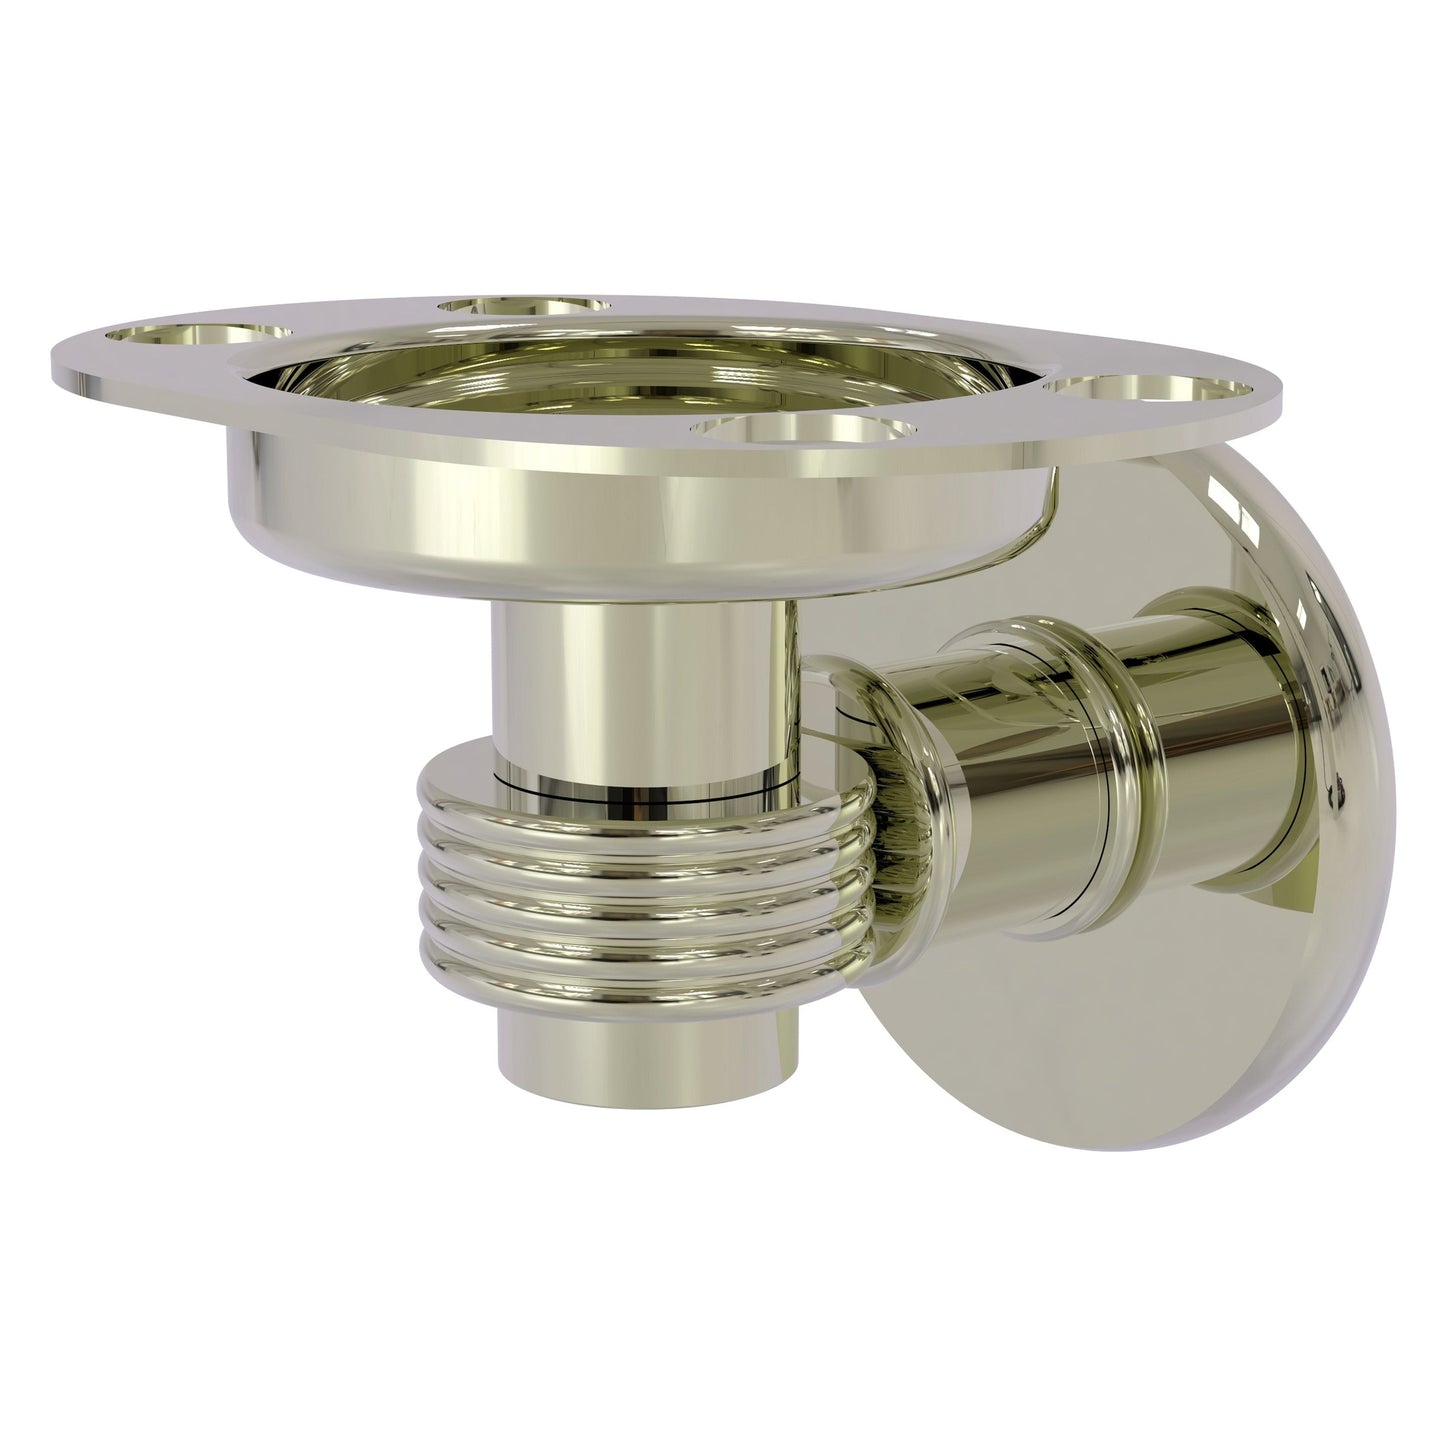 Allied Brass Continental 4.5" x 3.5" Polished Nickel Solid Brass Tumbler and Toothbrush Holder with Grooved Accents